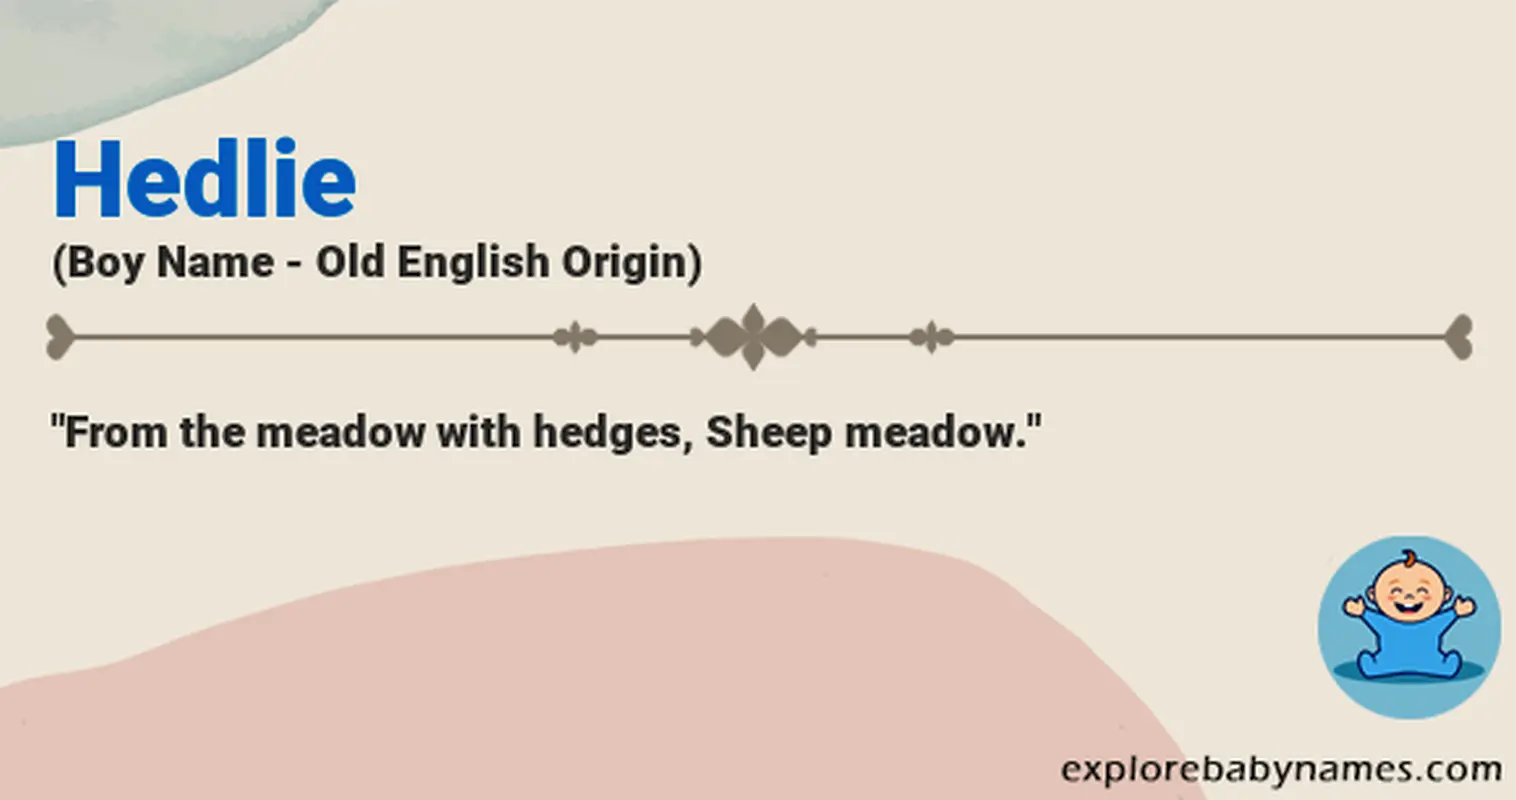 Meaning of Hedlie